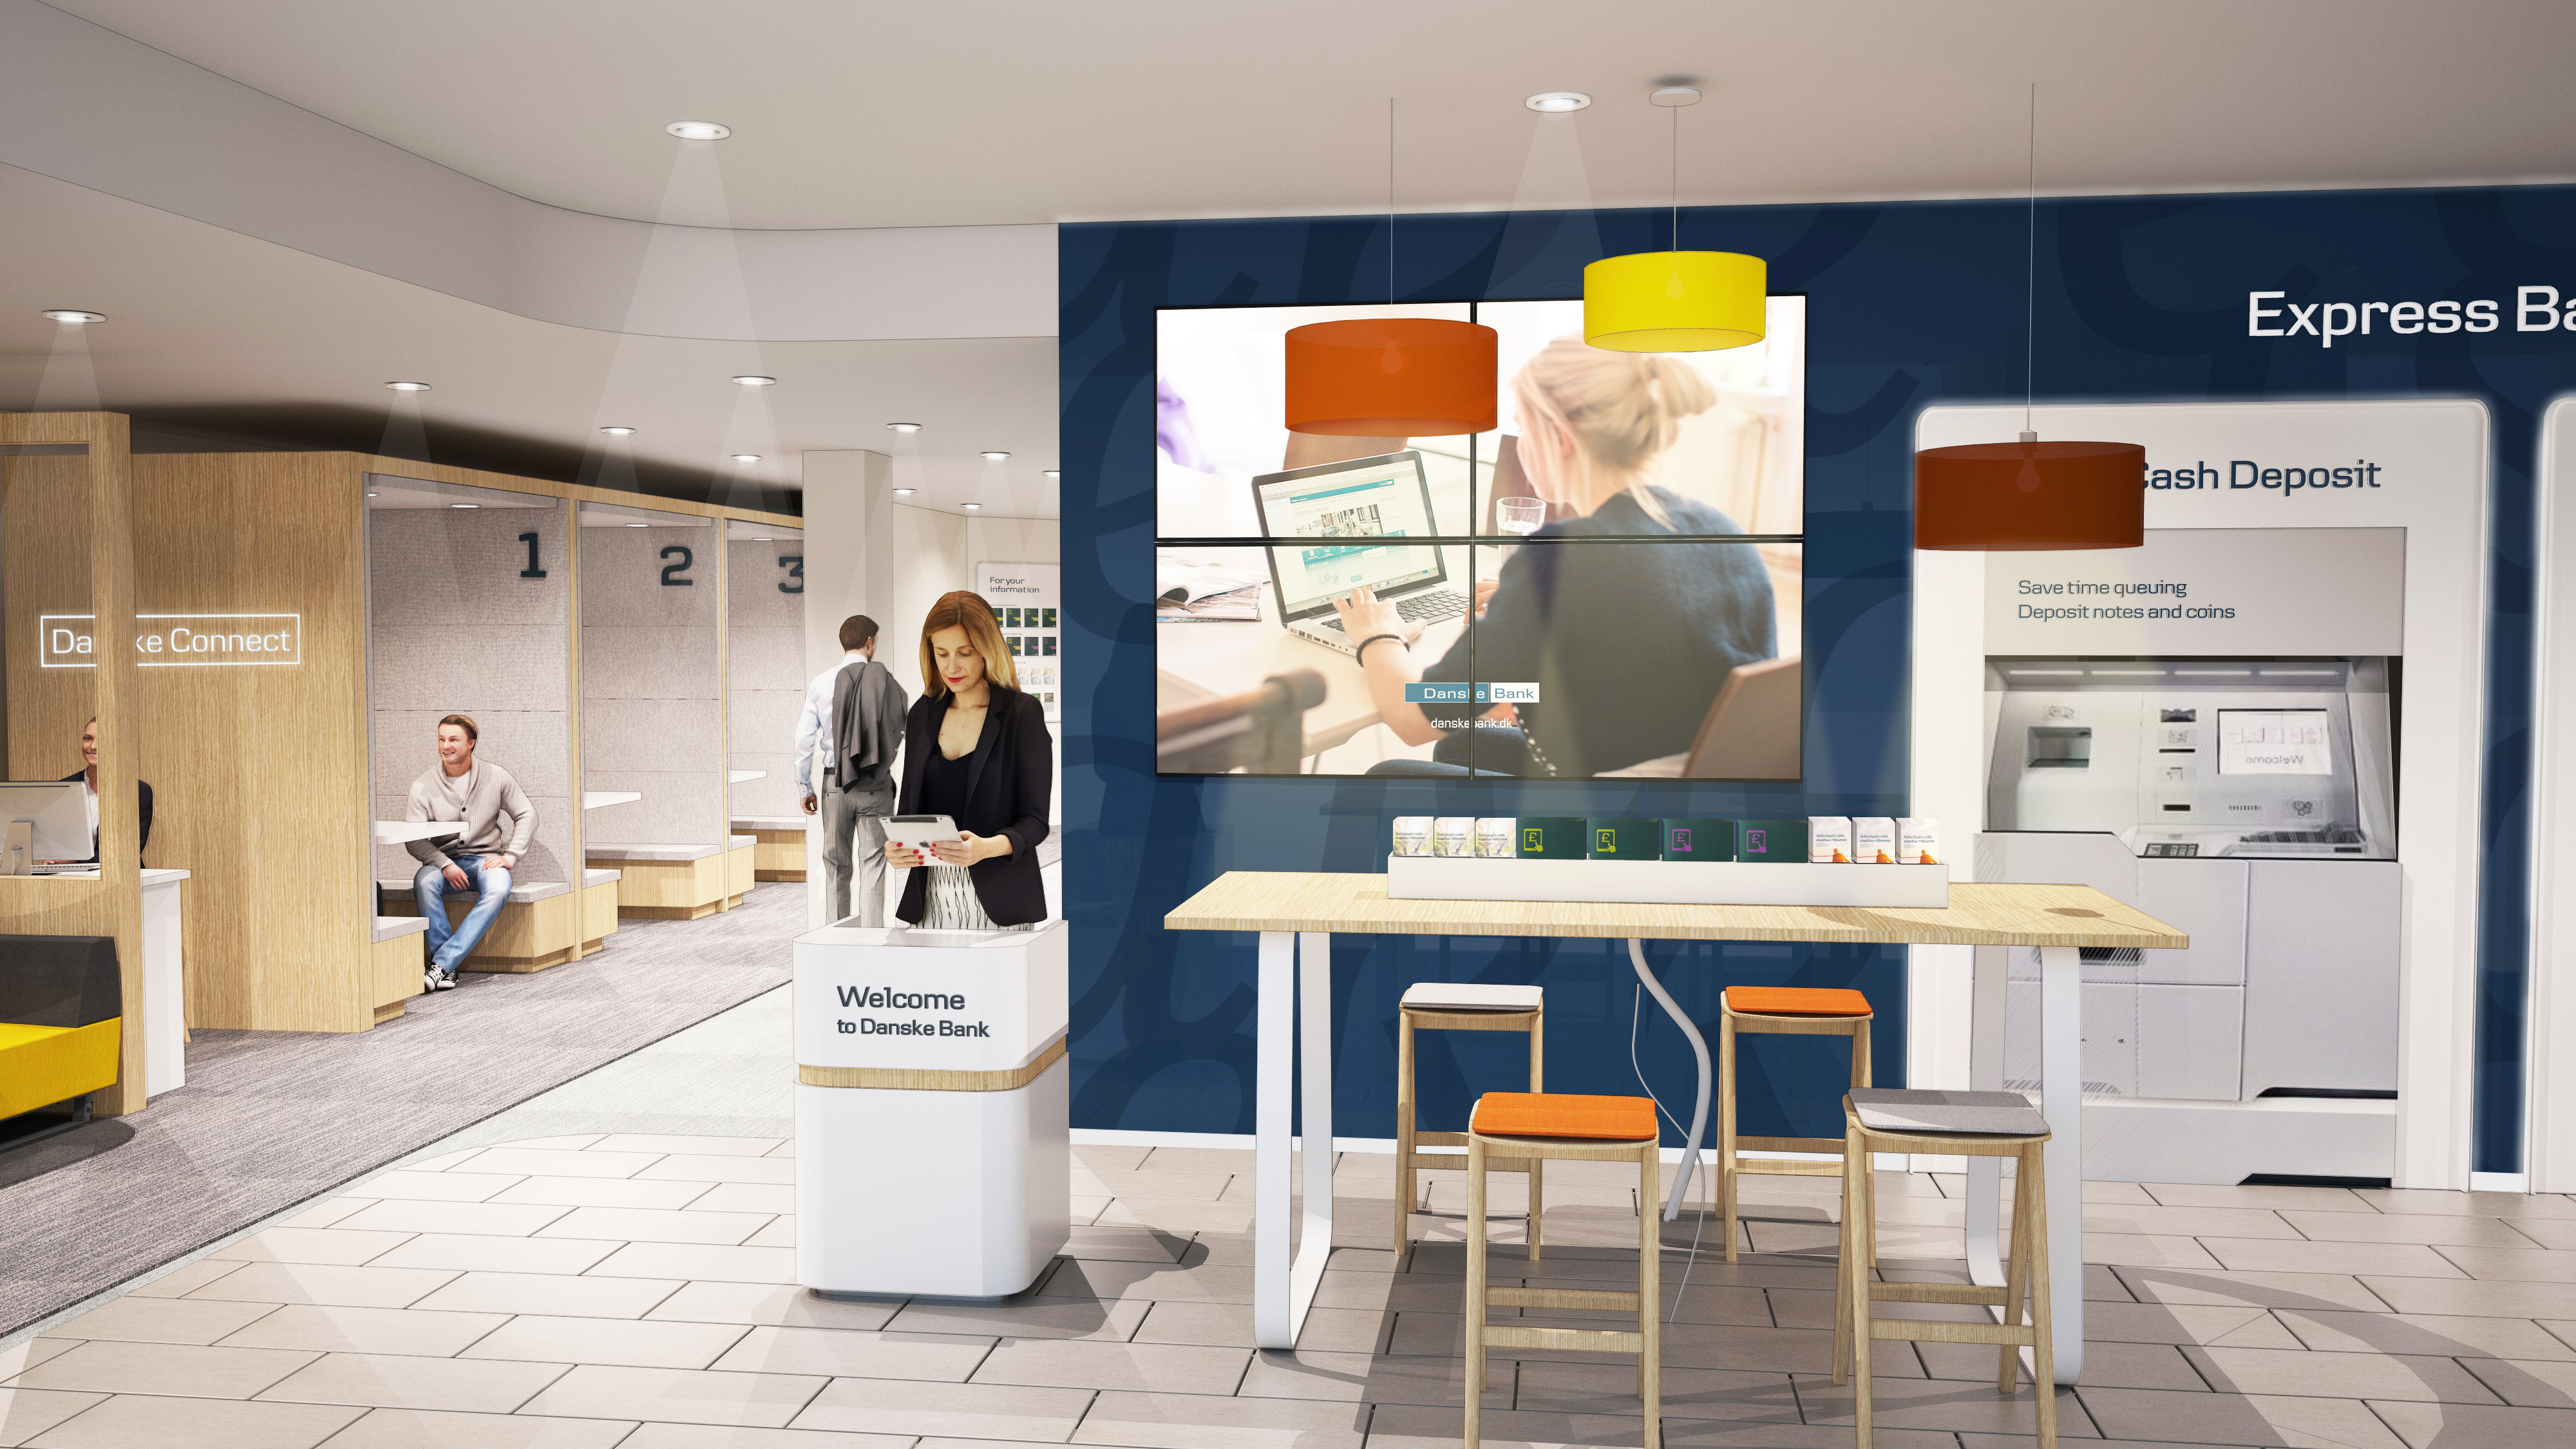 Image shows a mocked up version of the welcome hall of the new Bloomfield Danske Bank branch. To the left are Danske Connect pods, a light yellow. To the righ is a navy wall with a big TV, a high table and stools and some express deposit machines for lodging money.